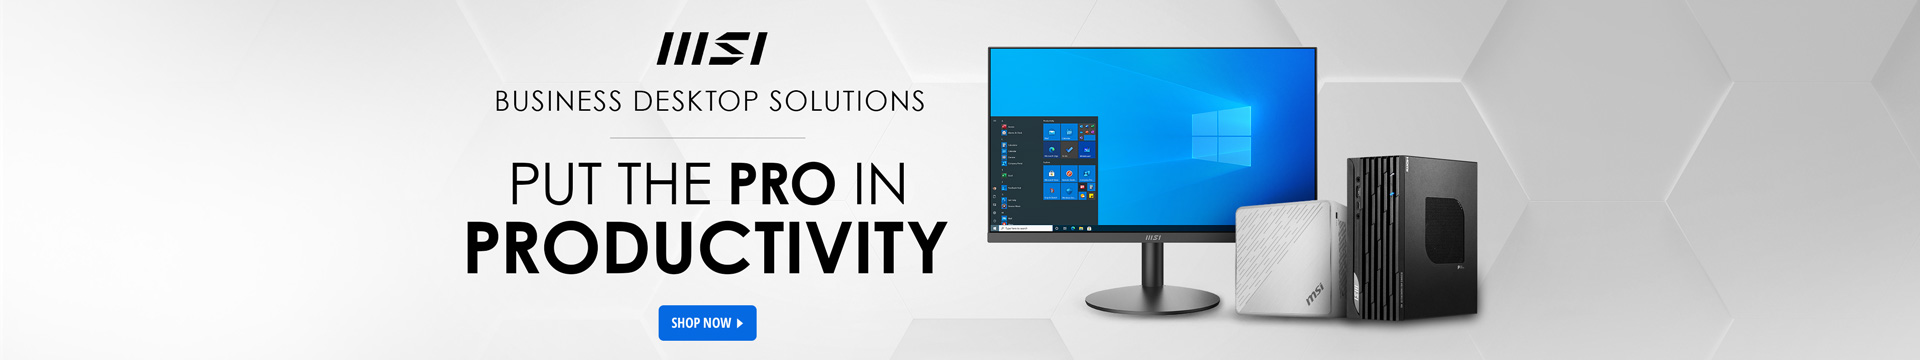 PUT THE PRO IN PRODUCTIVITY